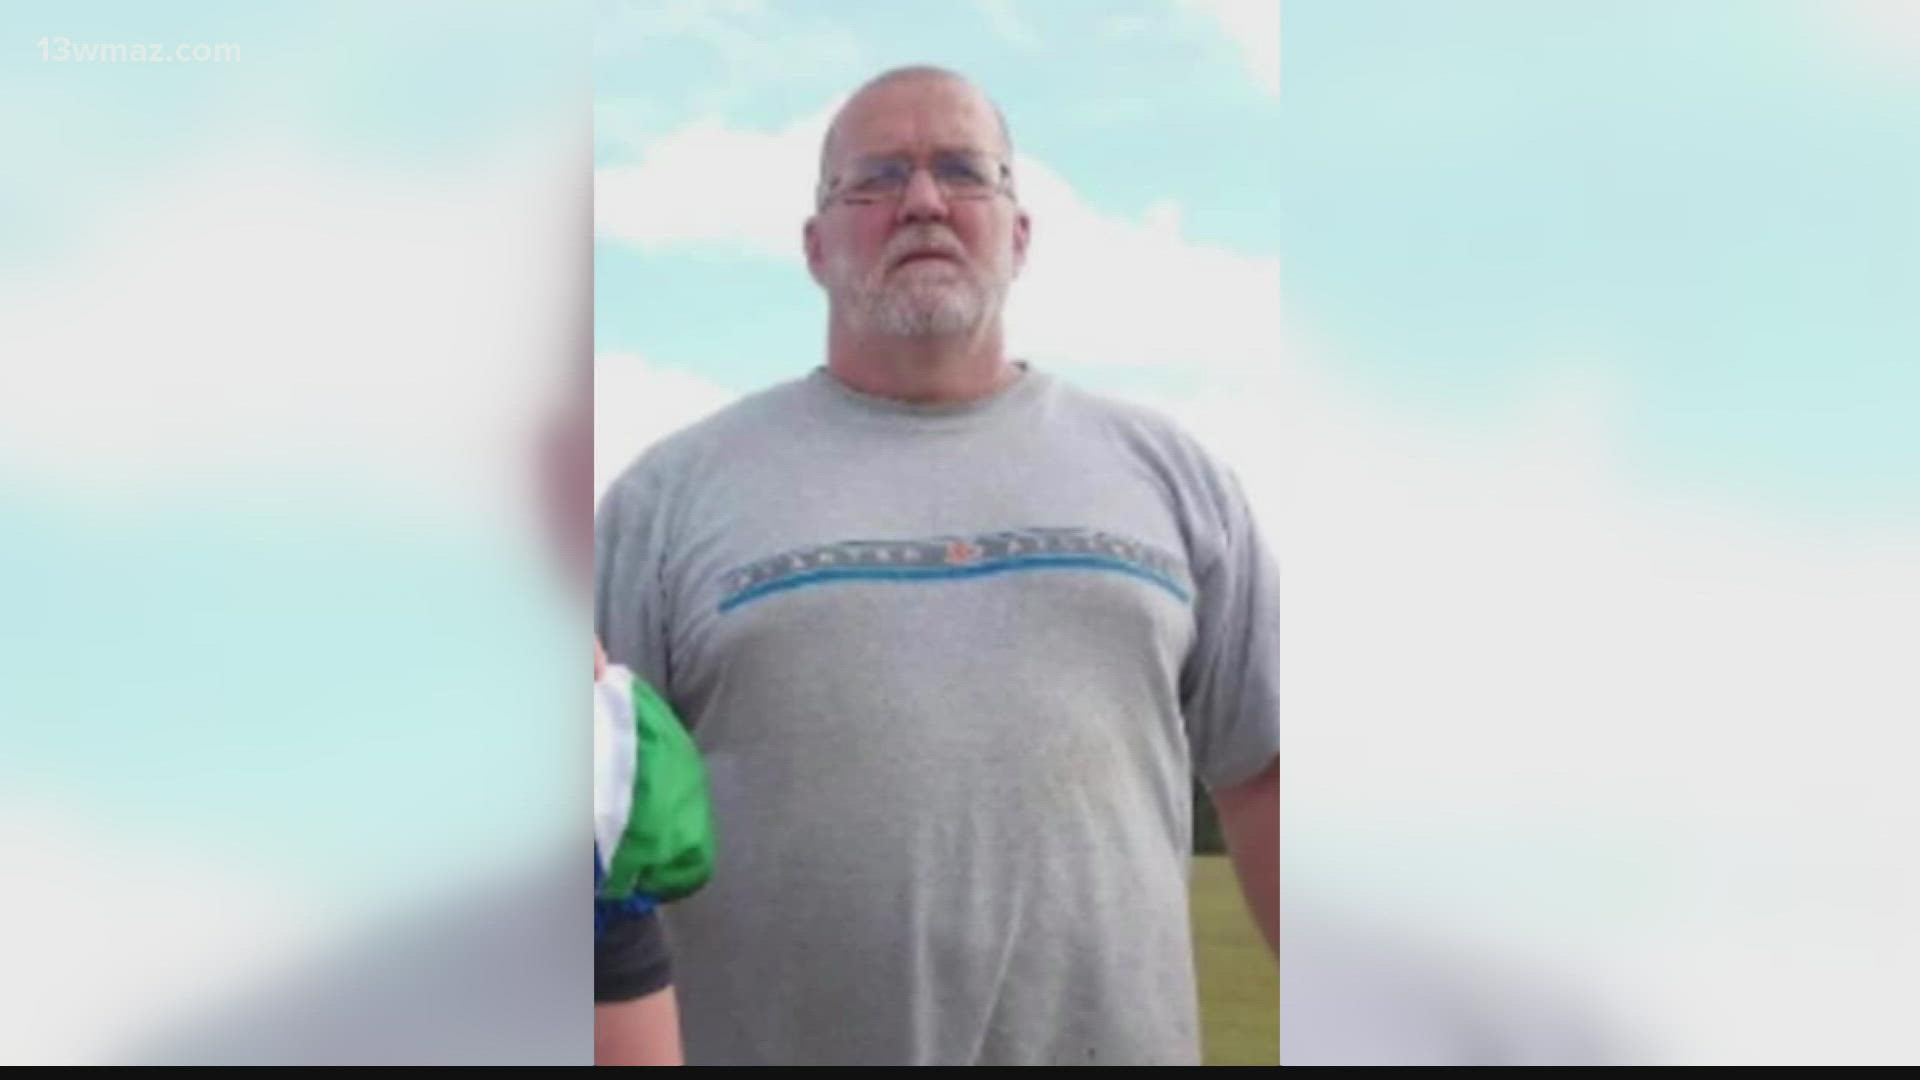 The sheriff's office is asking Scott Community residents to review their home security footage for possible sightings of Don Hightower's car.